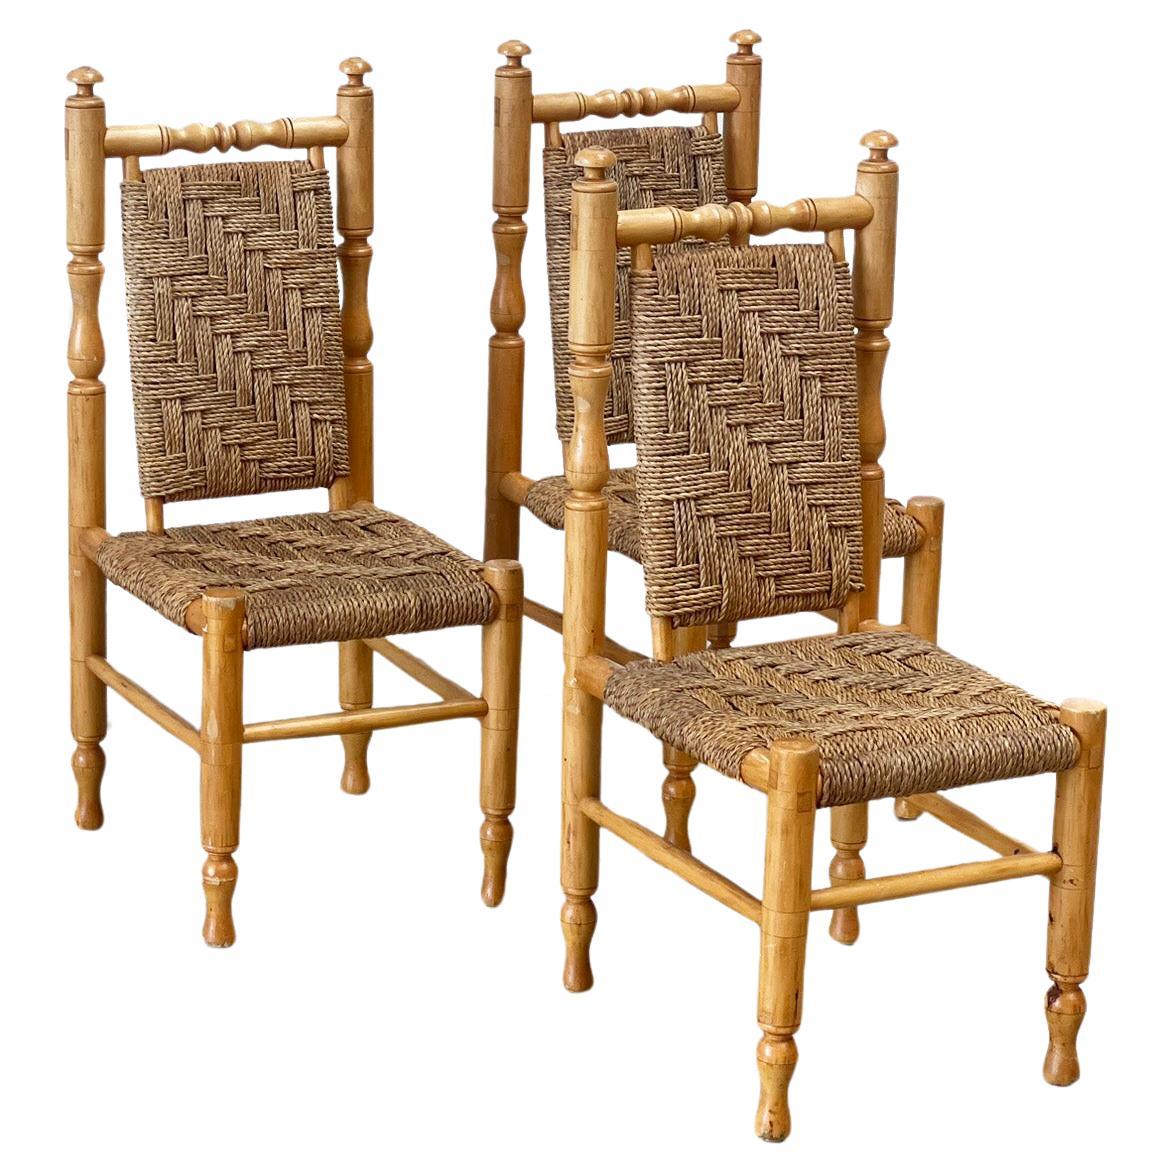 set of 3 sidechairs / dining chairs by by Adrien Audoux & Frida Minet